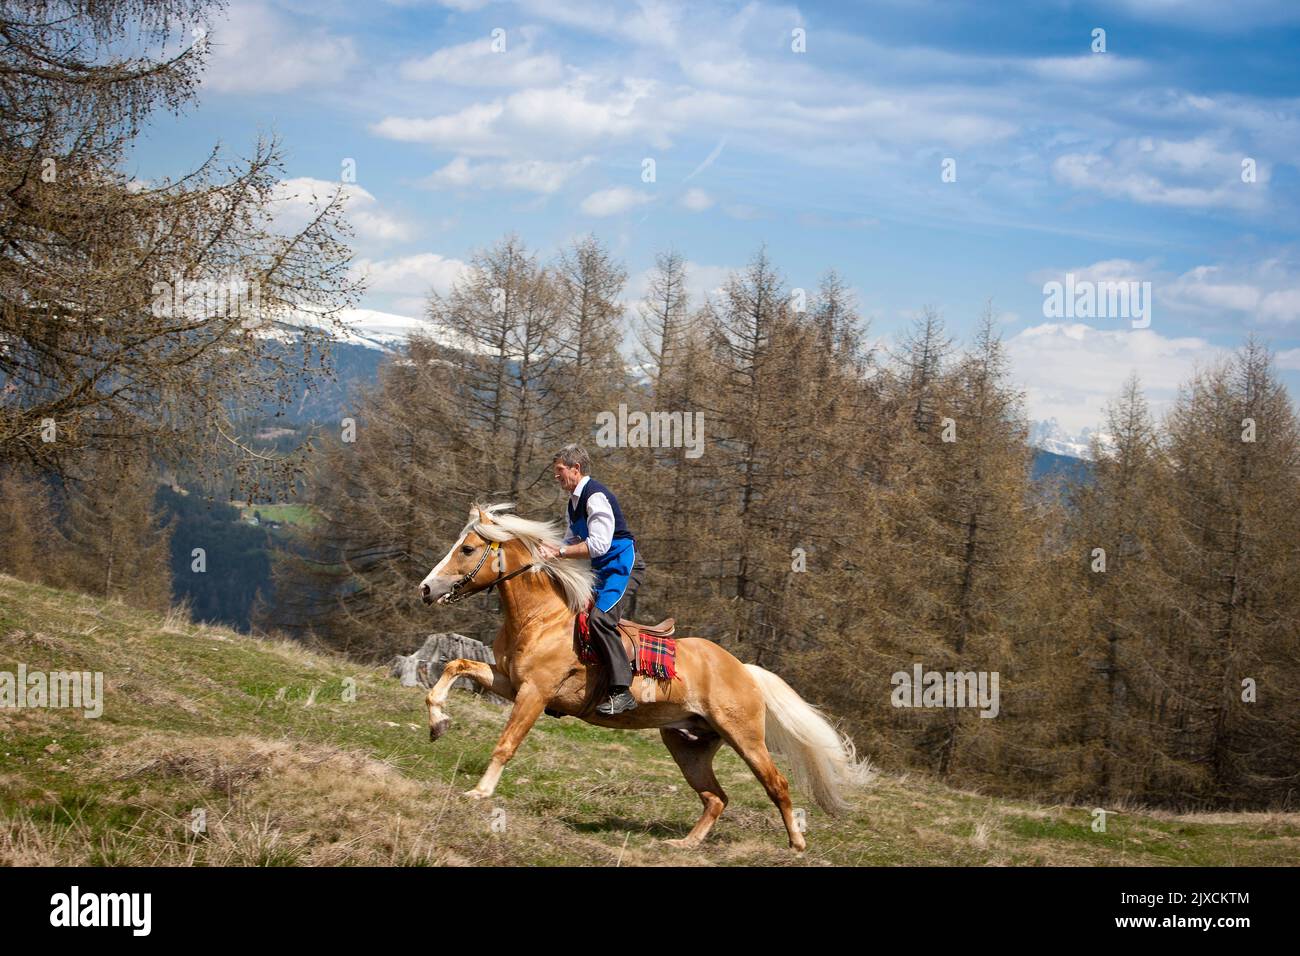 Haflinger Horse. Rider on stallion galloping on a mountain pasture. Germany Stock Photo